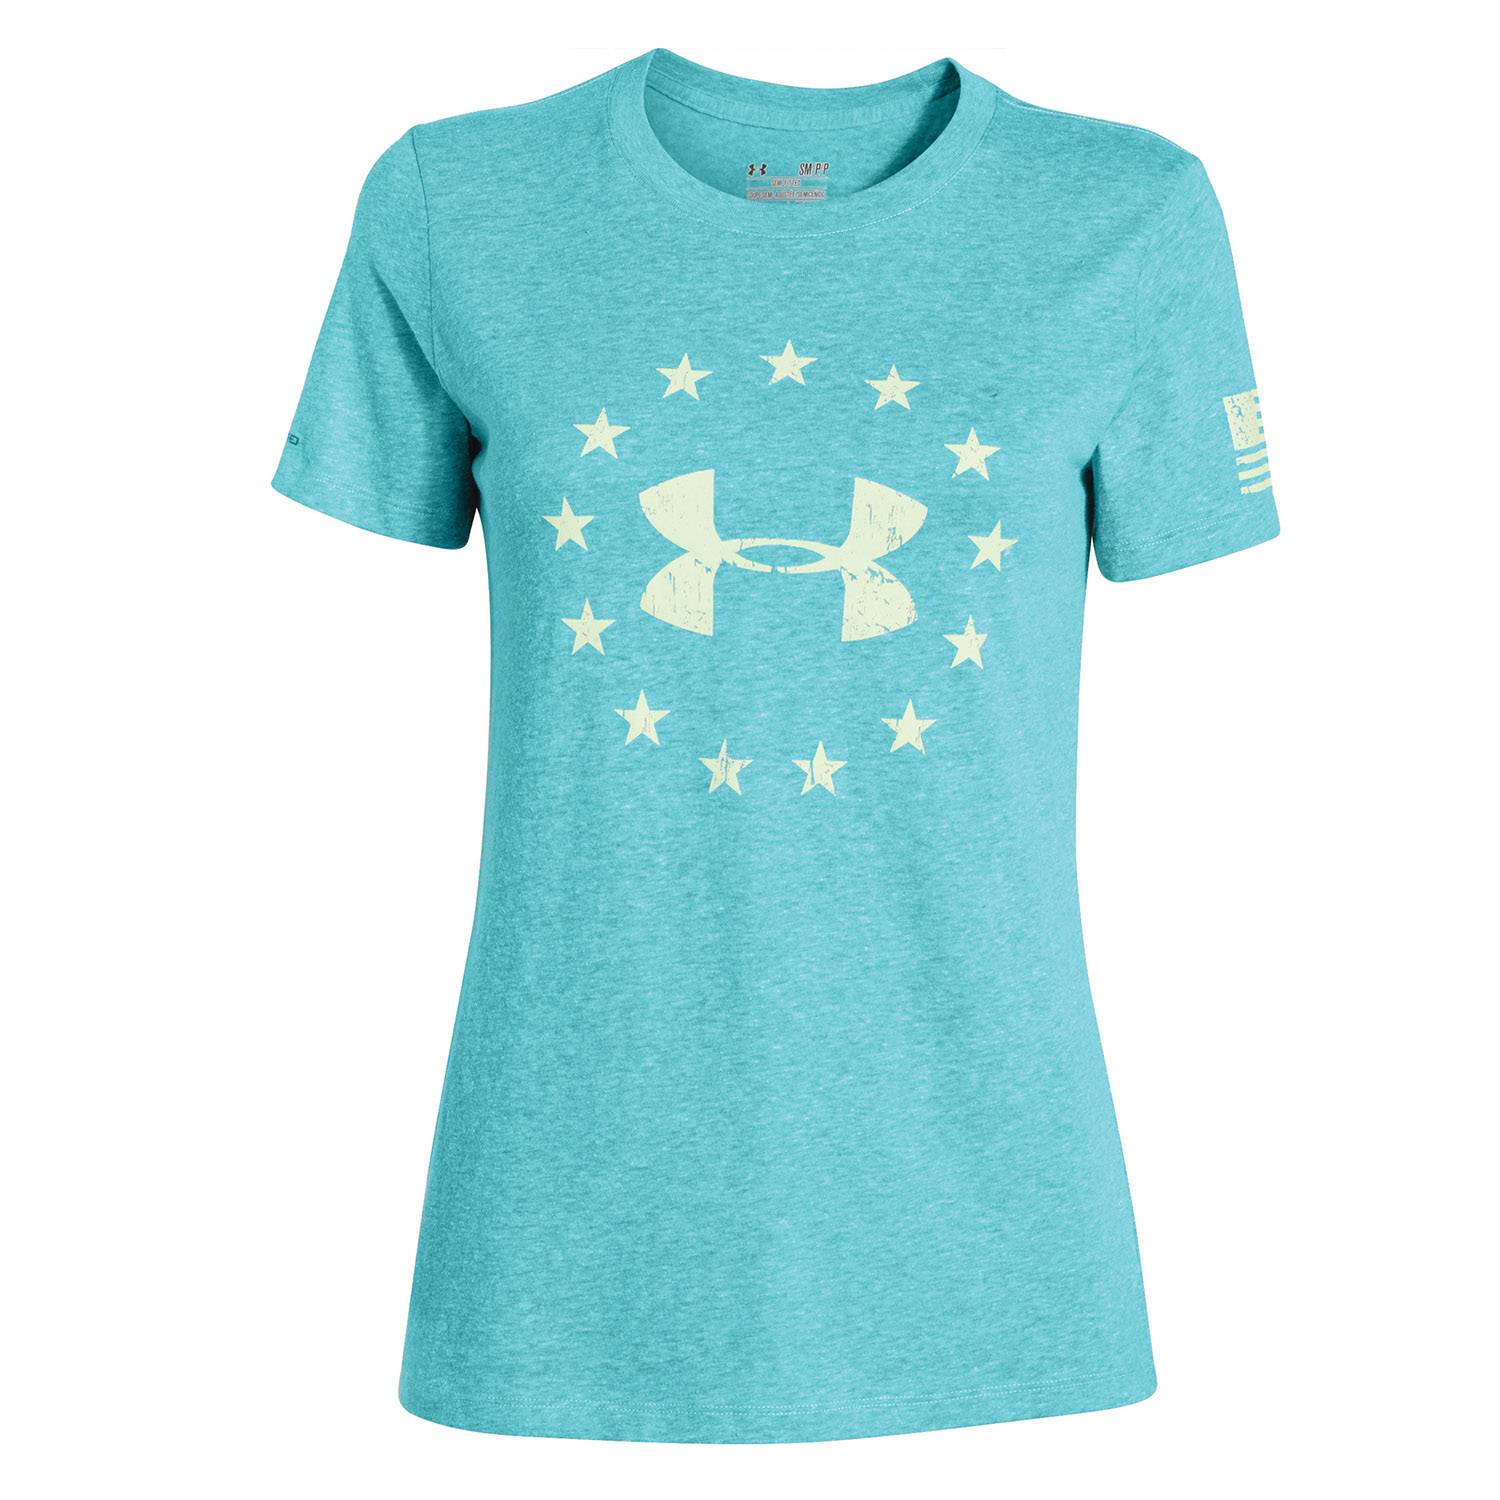 UNDER ARMOUR WOMEN'S FREEDOM T-SHIRT